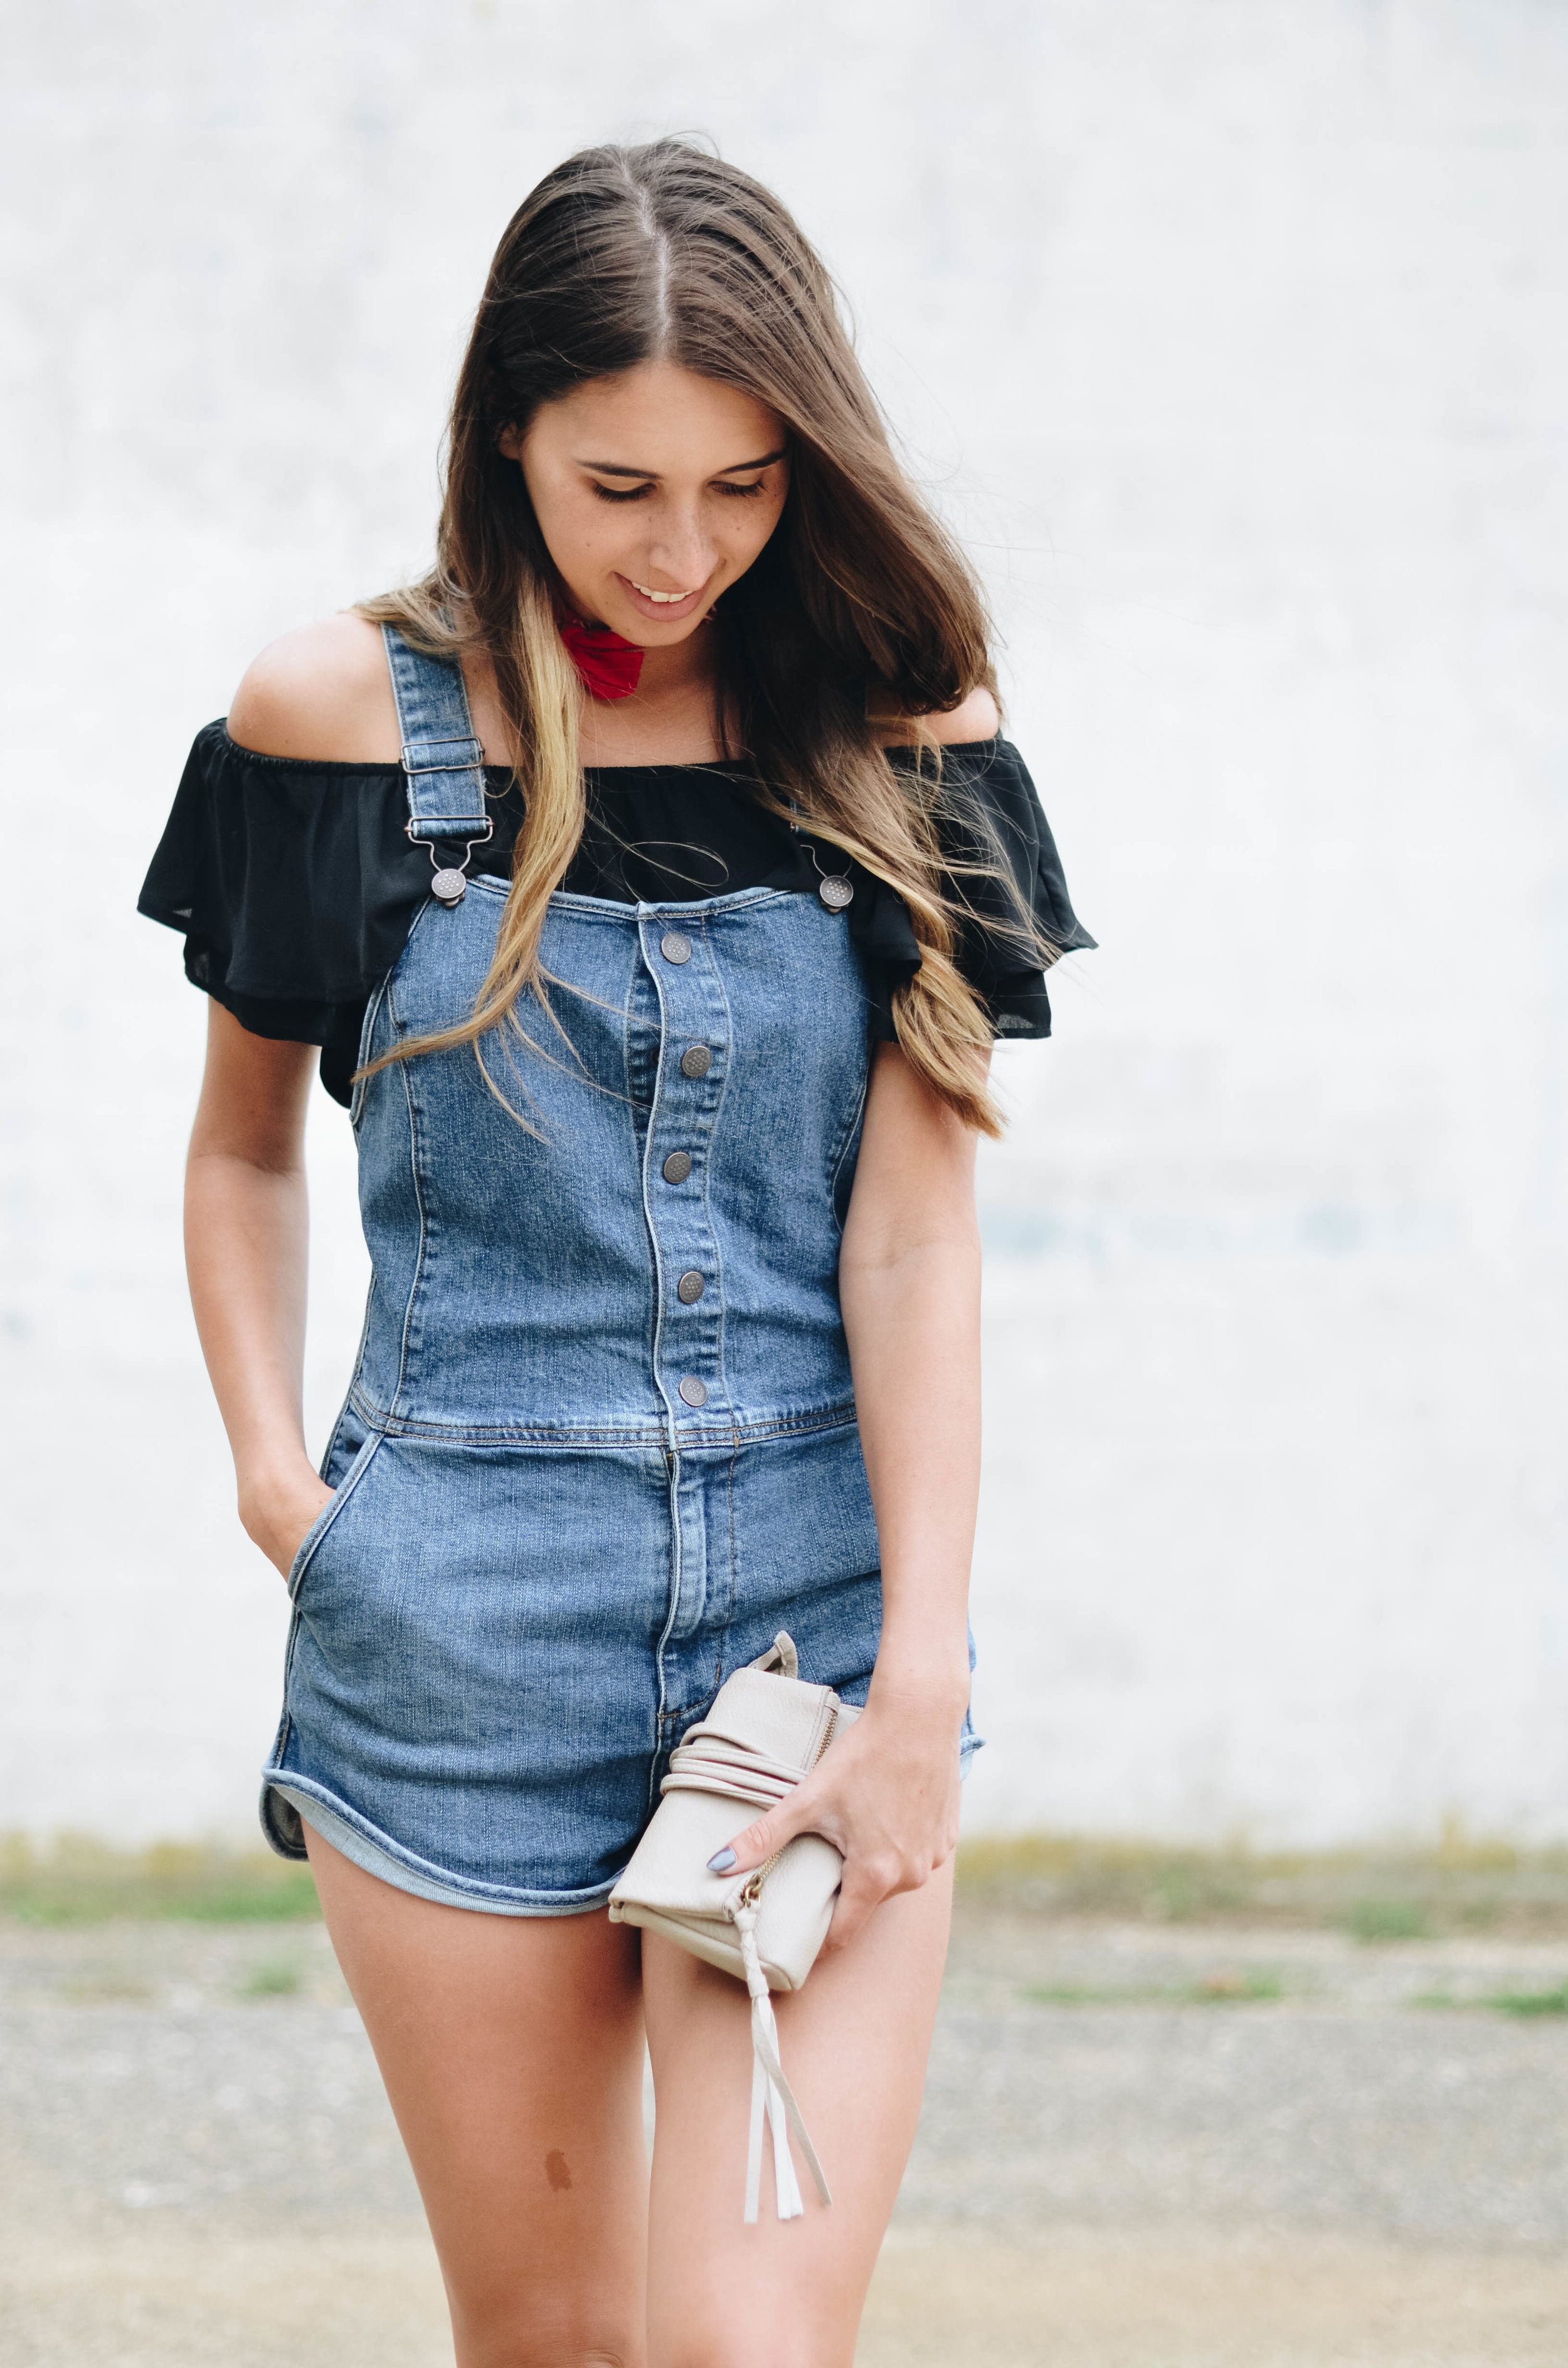 Overalls Off the shoulder top style outfit